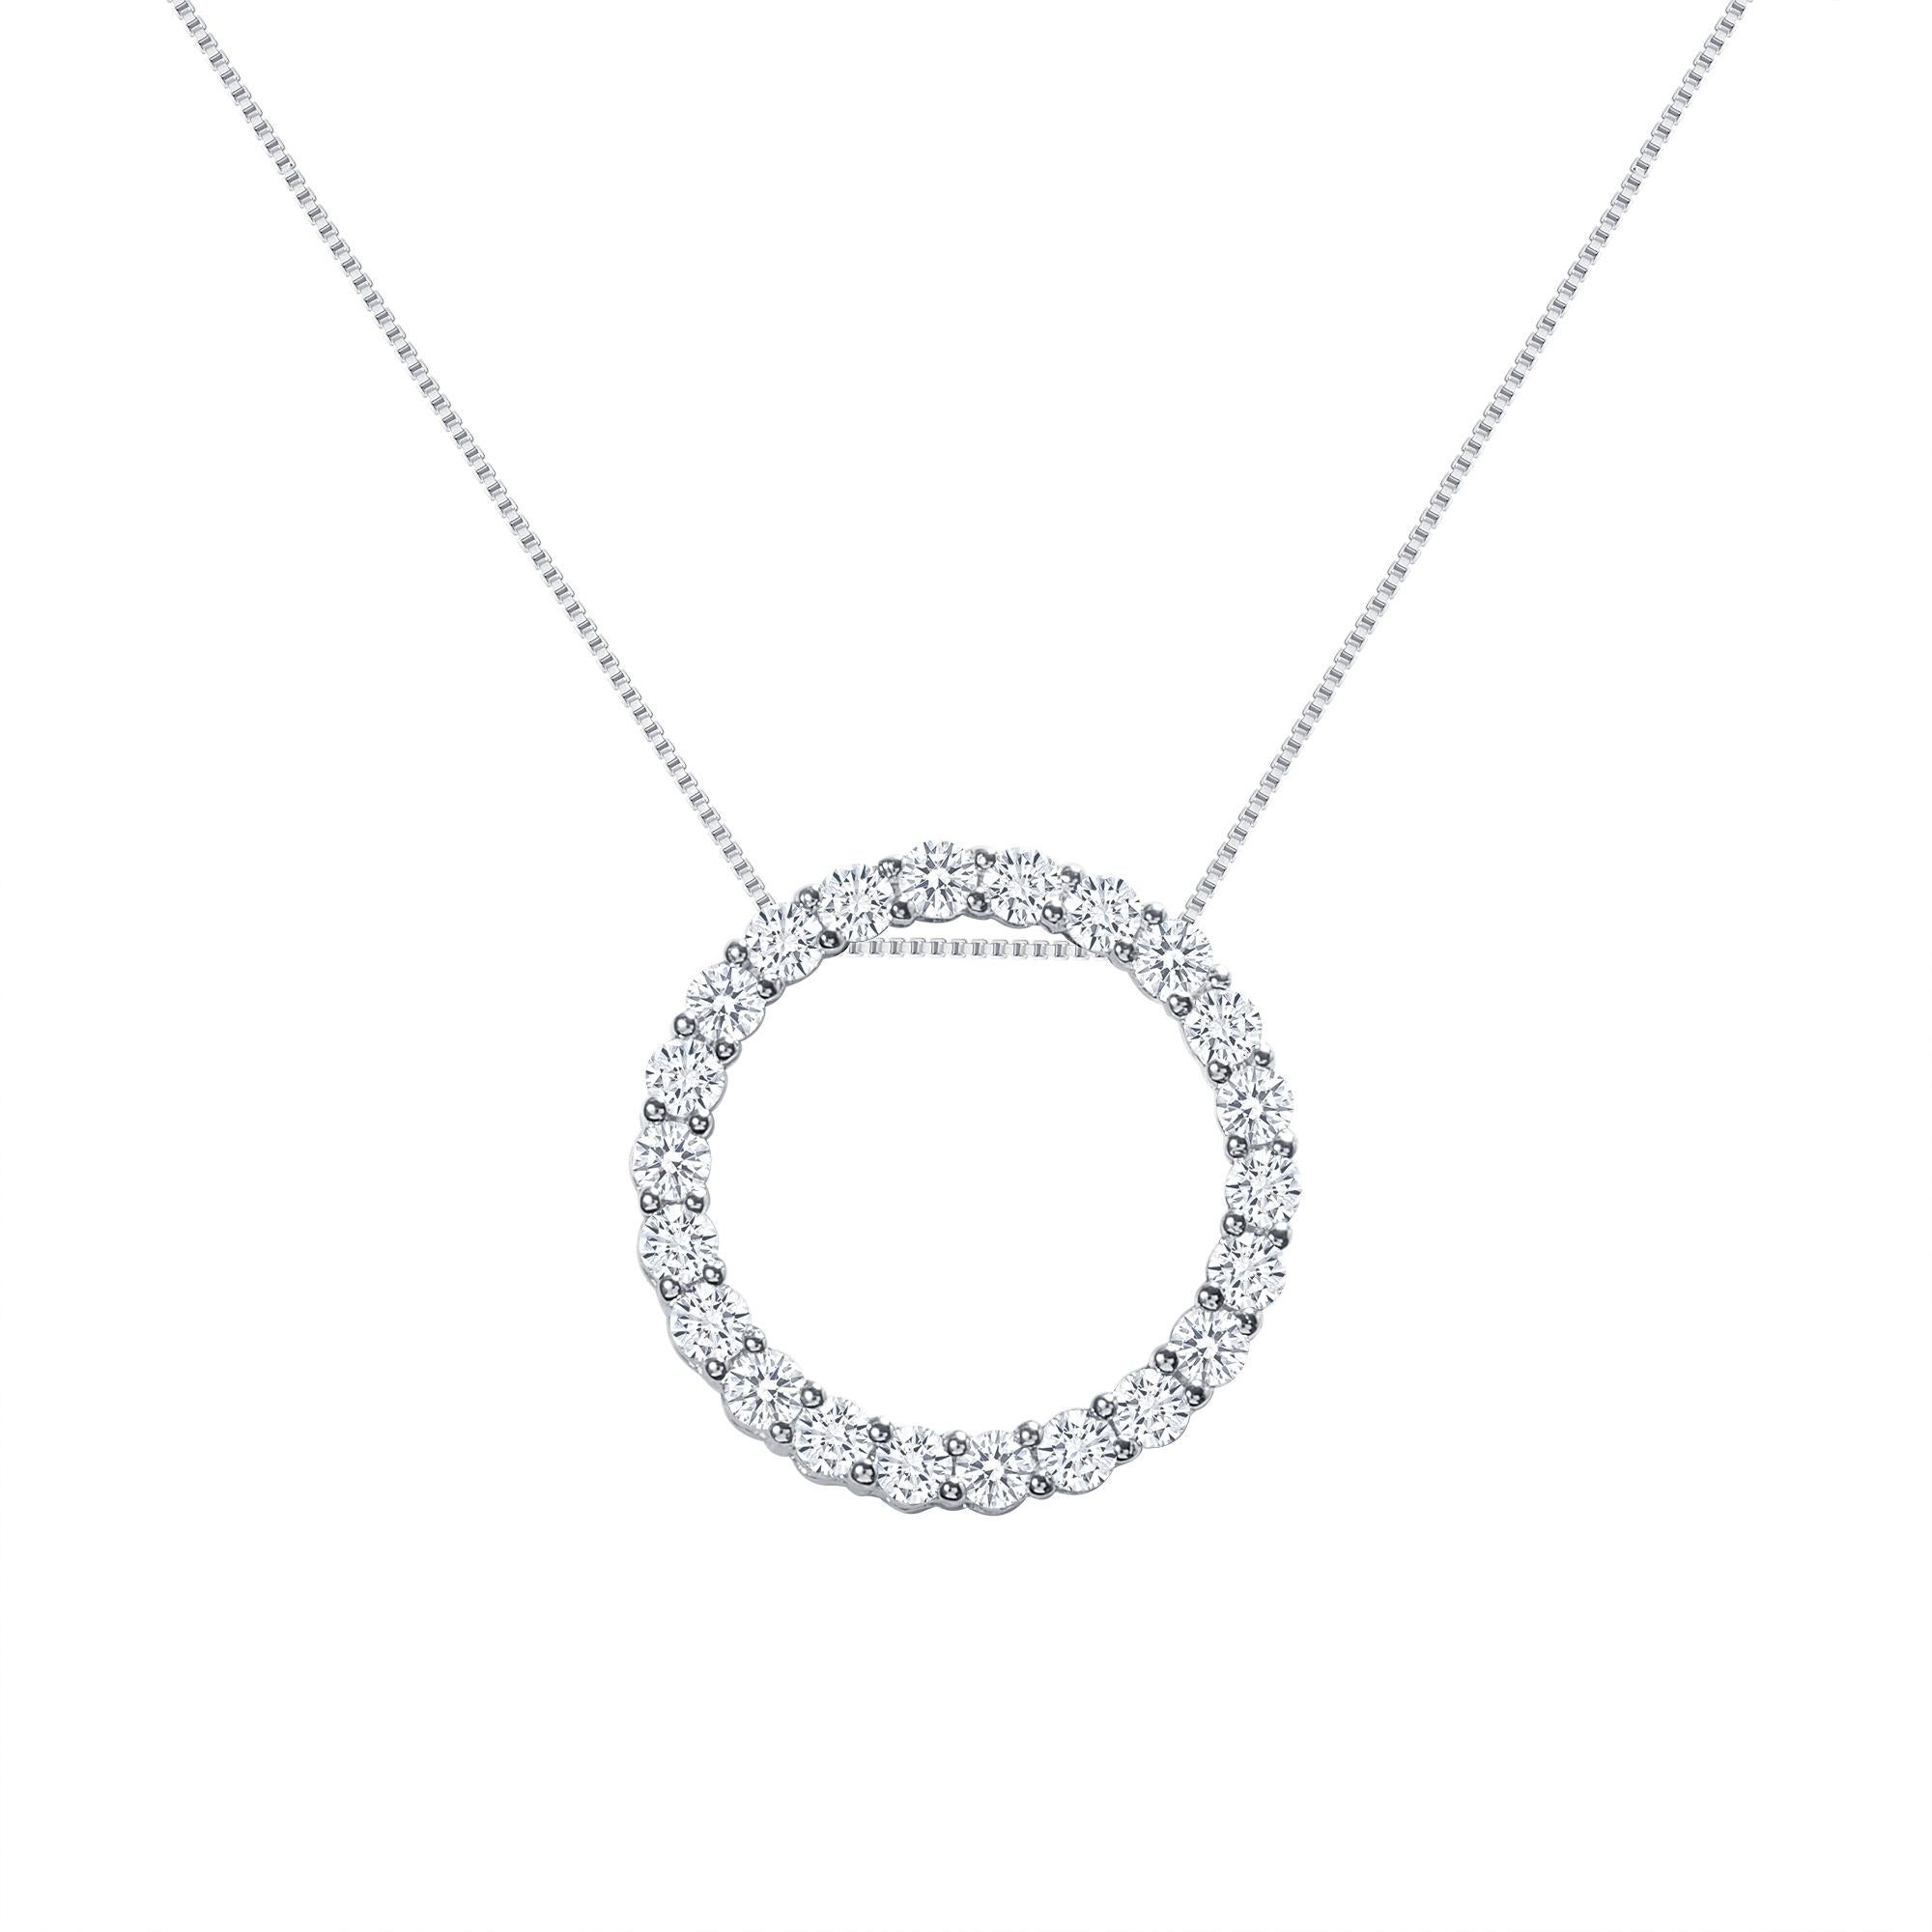 This diamond circle pendant provides a glowing chic look.
Metal: 14k Gold
Diamond Total Carats: 2 carat
Diamond Cut: Round Natural Diamonds (Not Lab Grown)
Diamond Clarity: VS
Diamond Color: F-G
Color: White Gold
Necklace Length: 20 inches